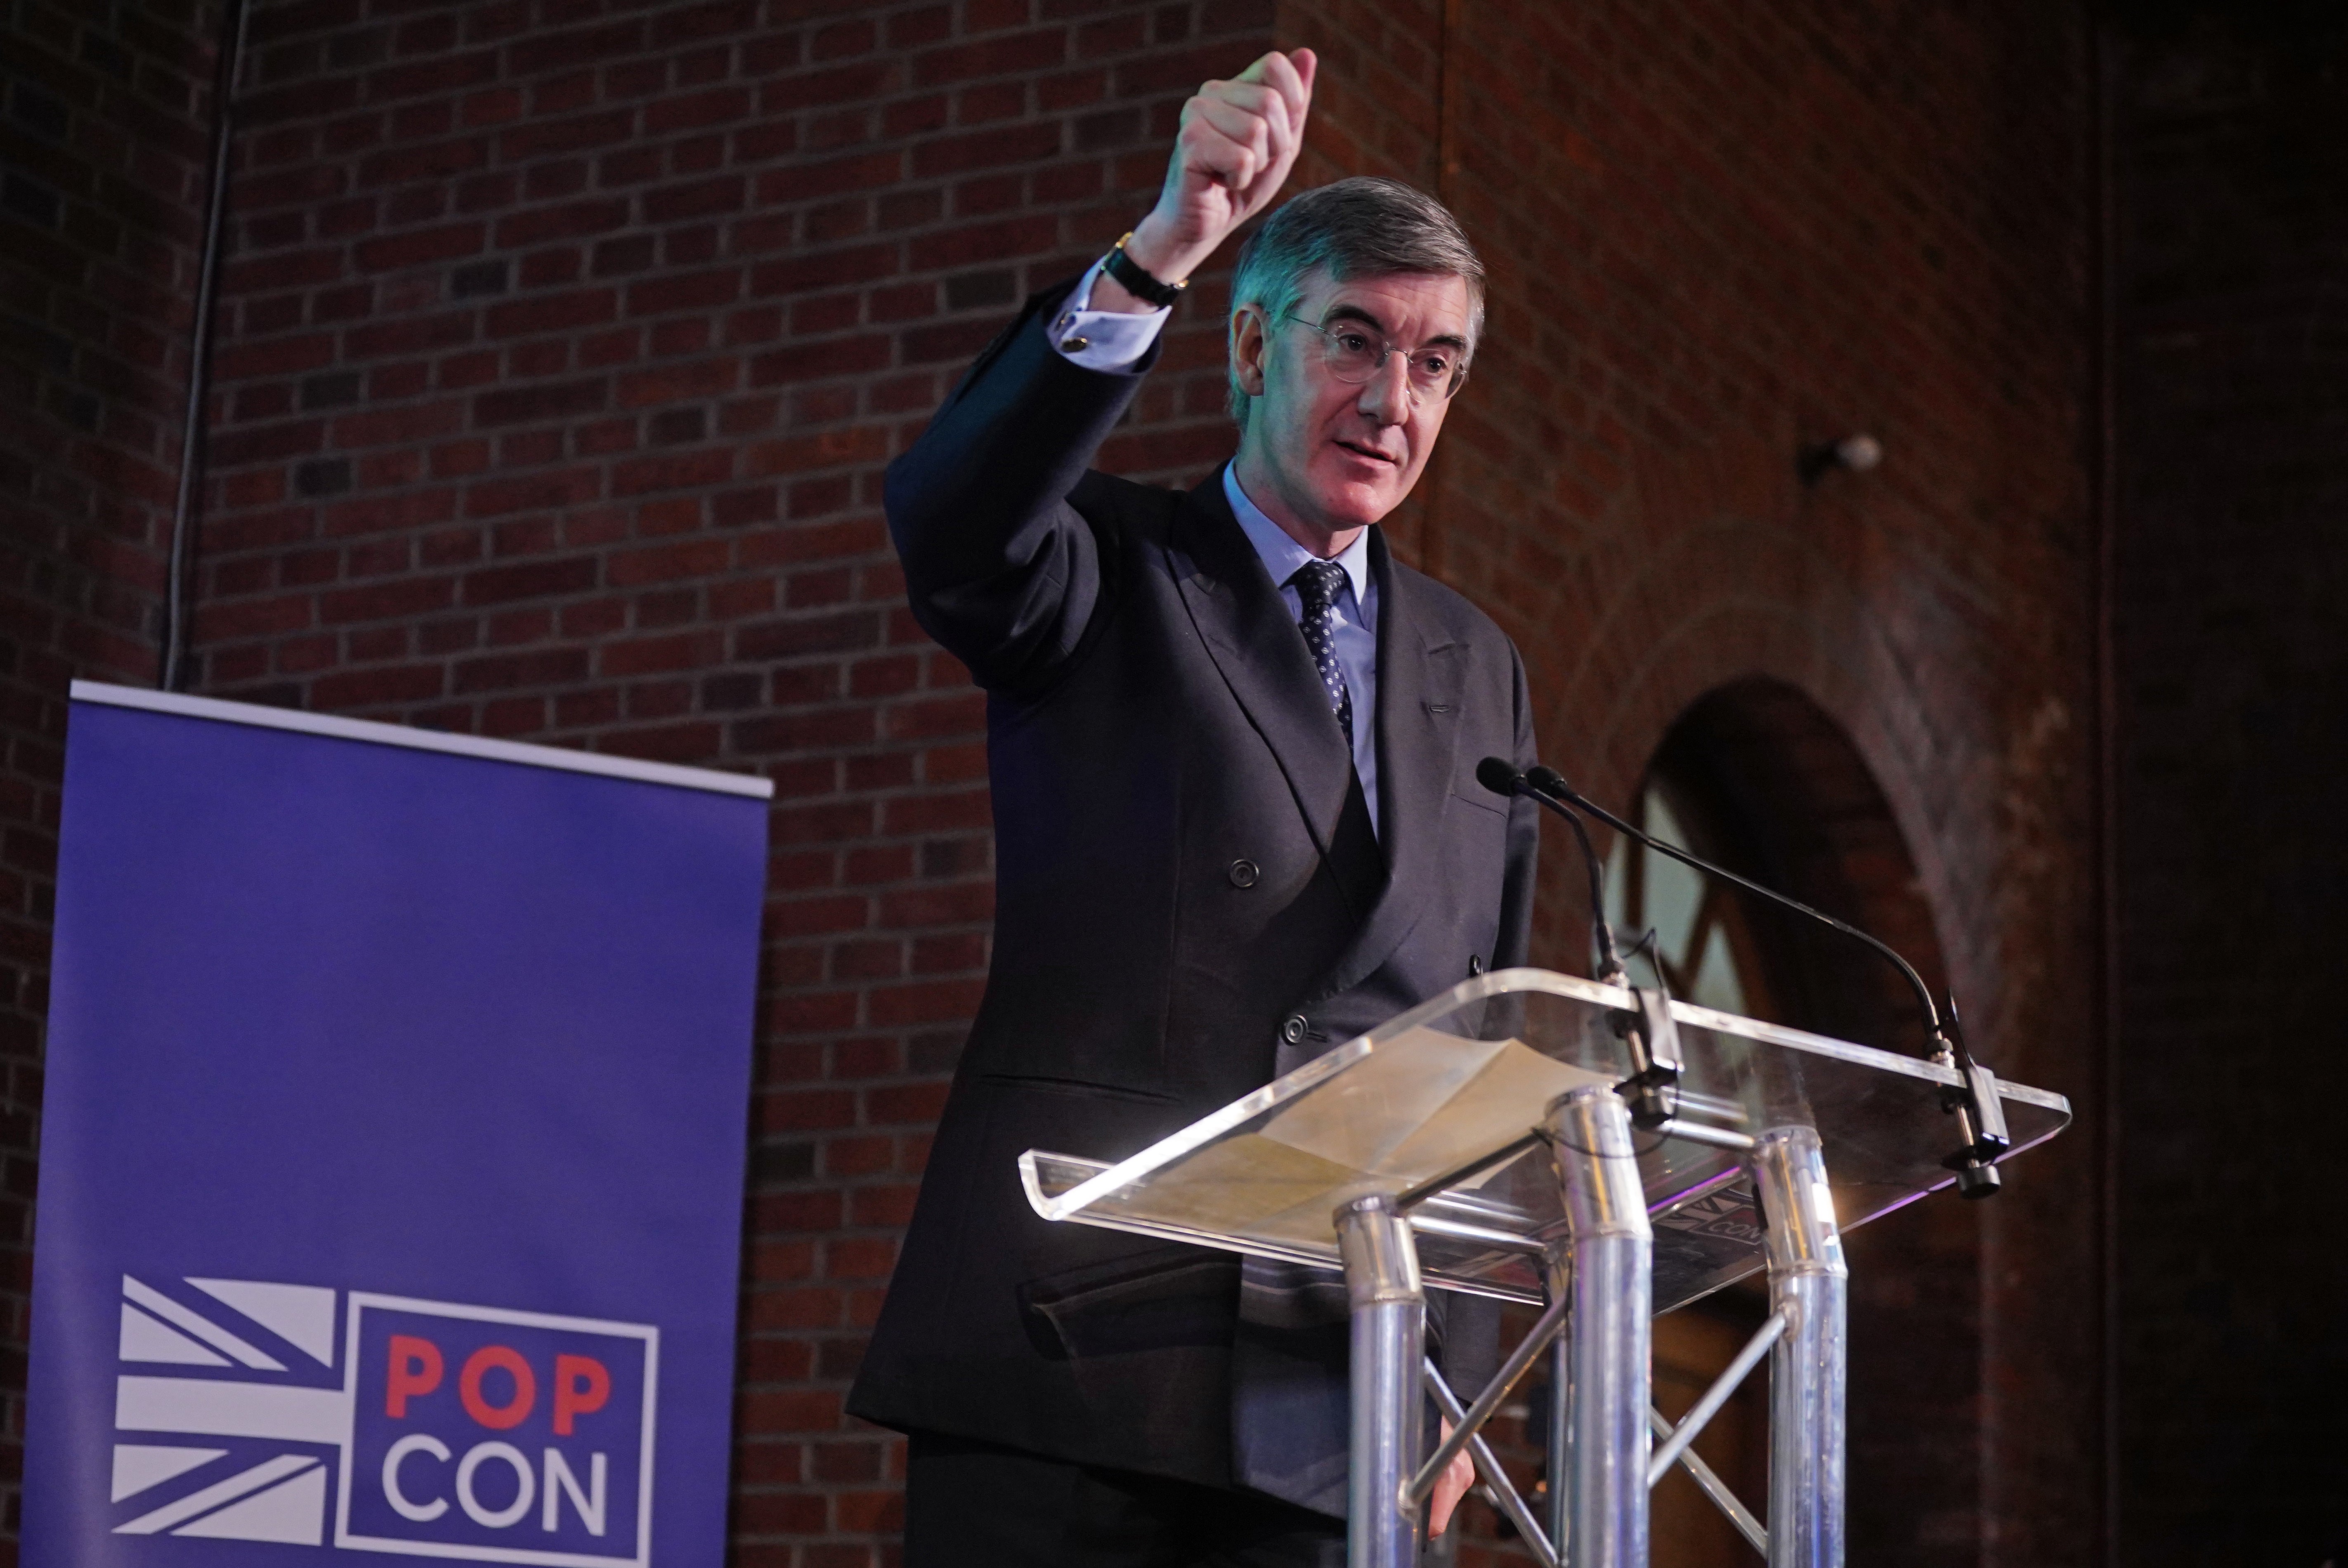 Sir Jacob Rees-Mogg during the launch of Popular Conservatism